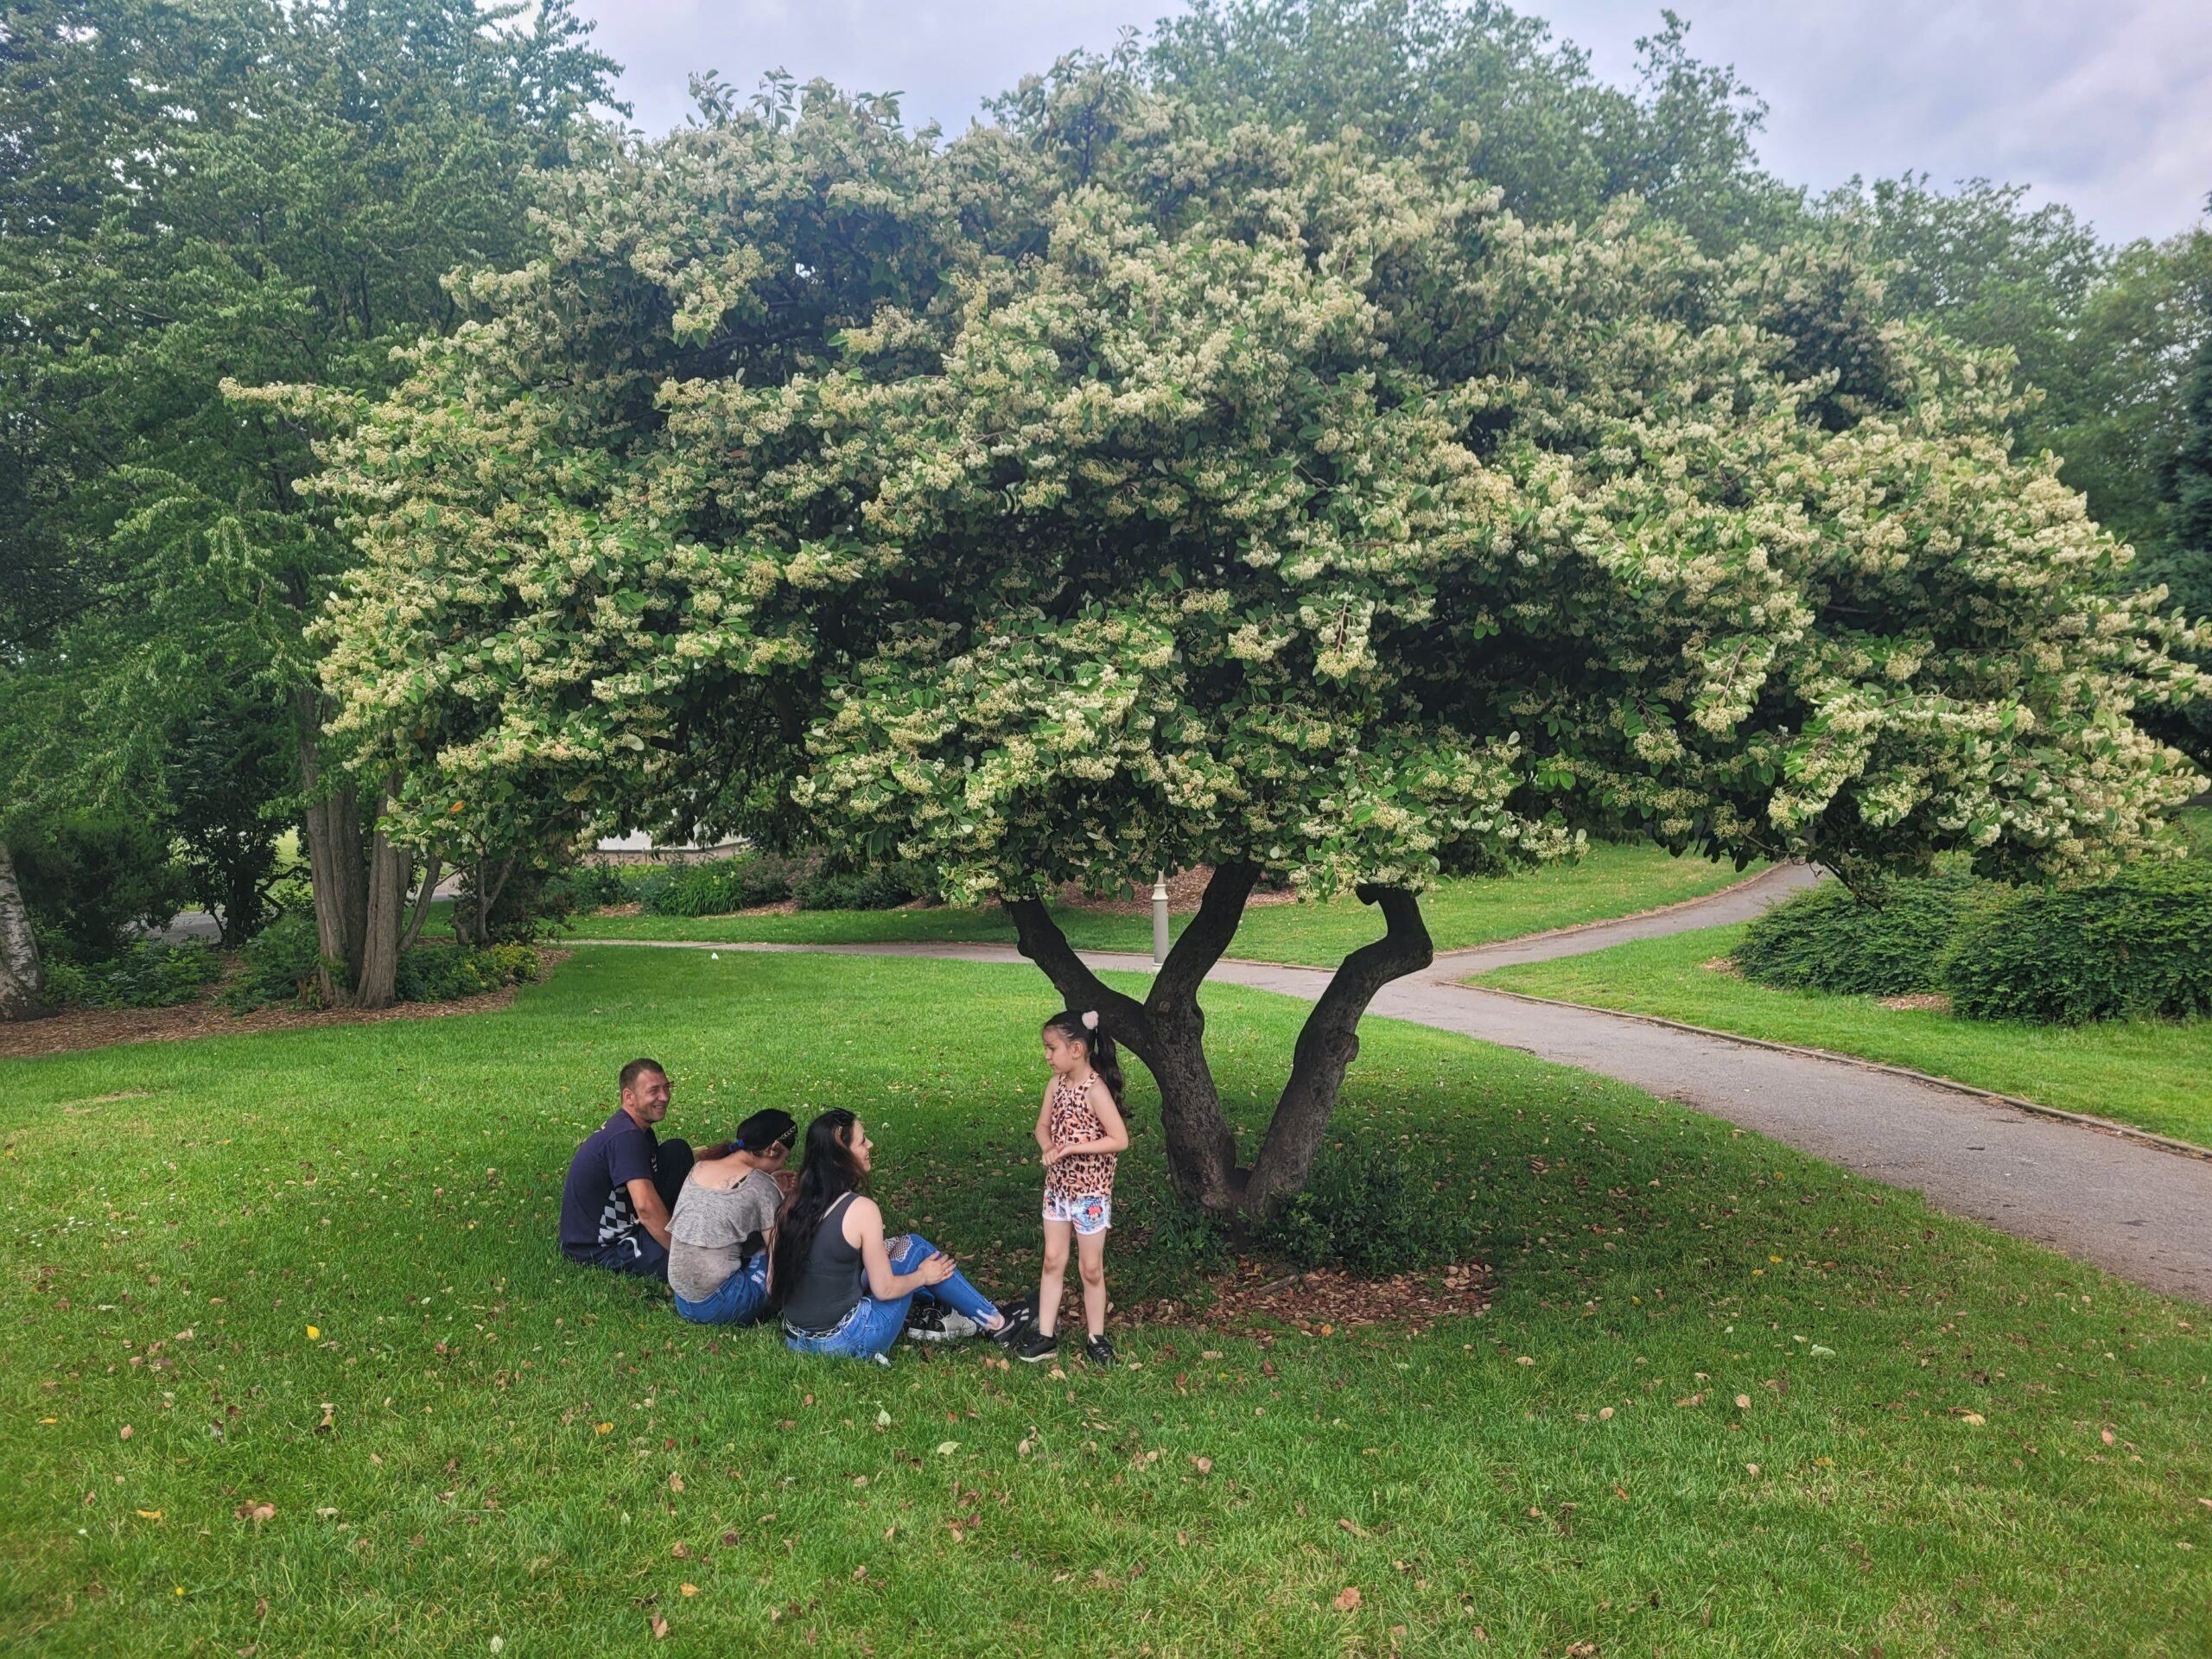 A family laughing beneath the canopy of a tree in Handsworth Park, taken with permission.